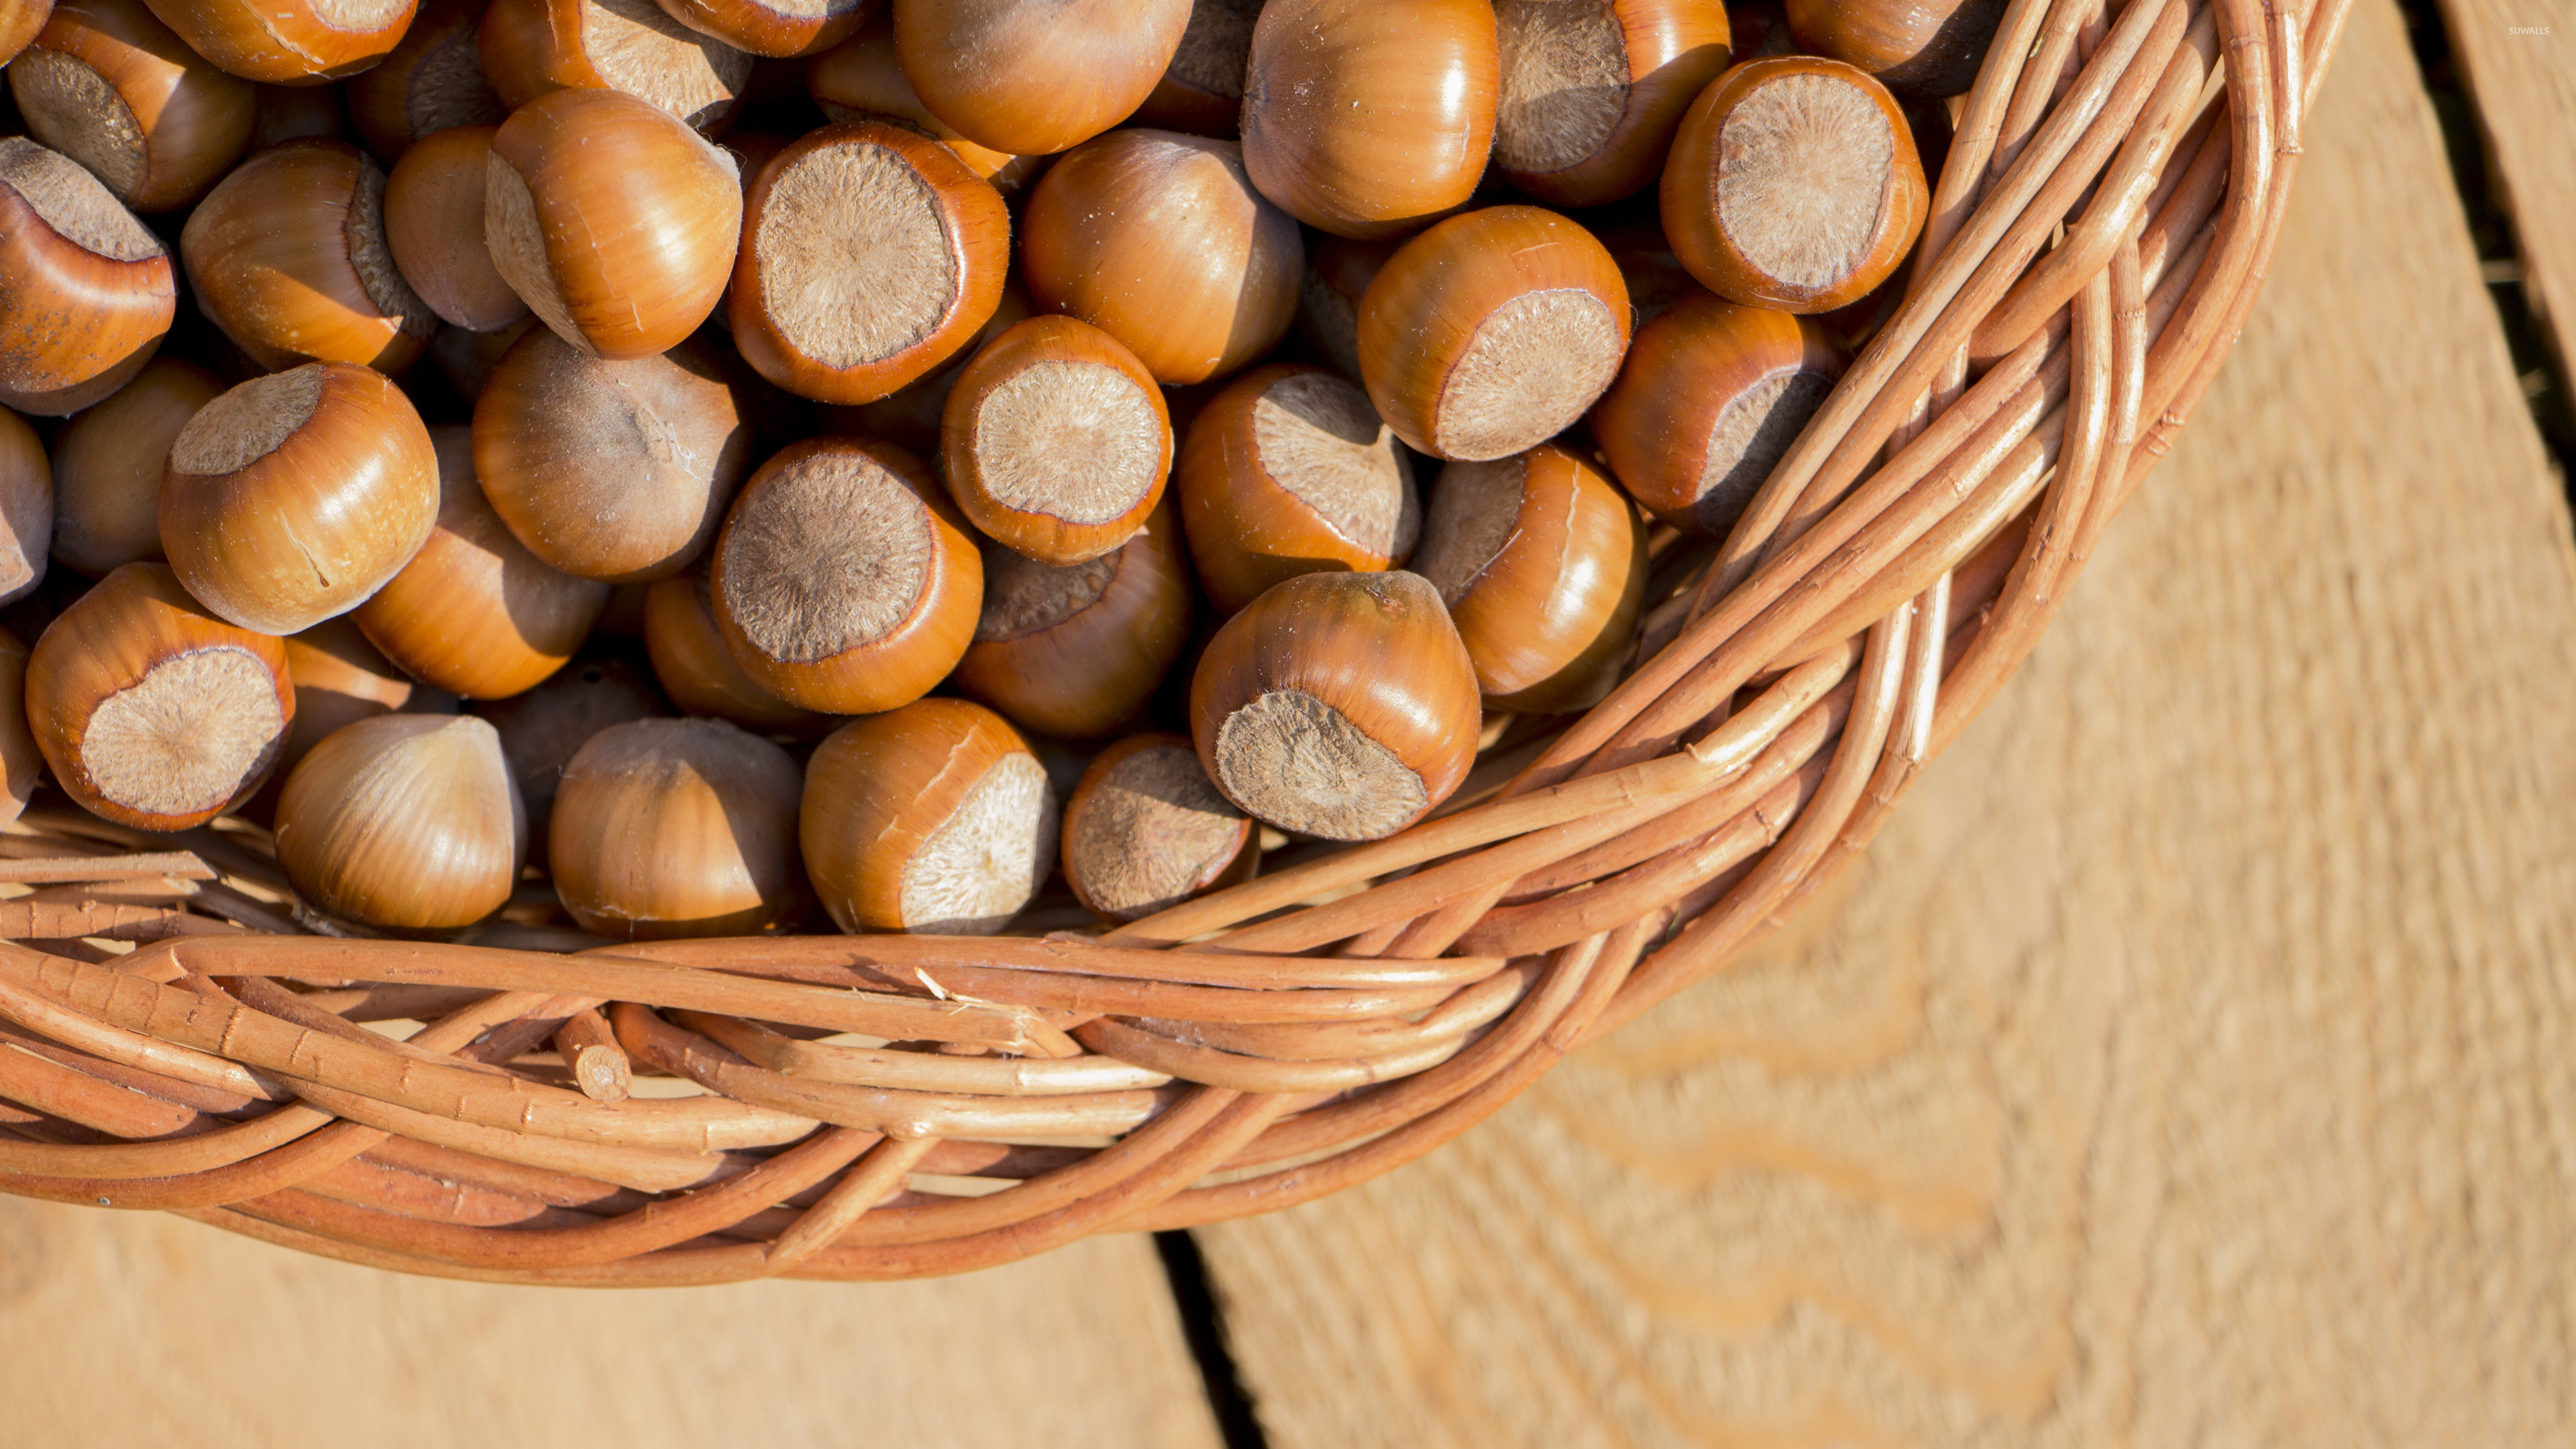 Nuts: Hazelnuts, Encased in a smooth, hard brown shell. 3840x2160 4K Wallpaper.